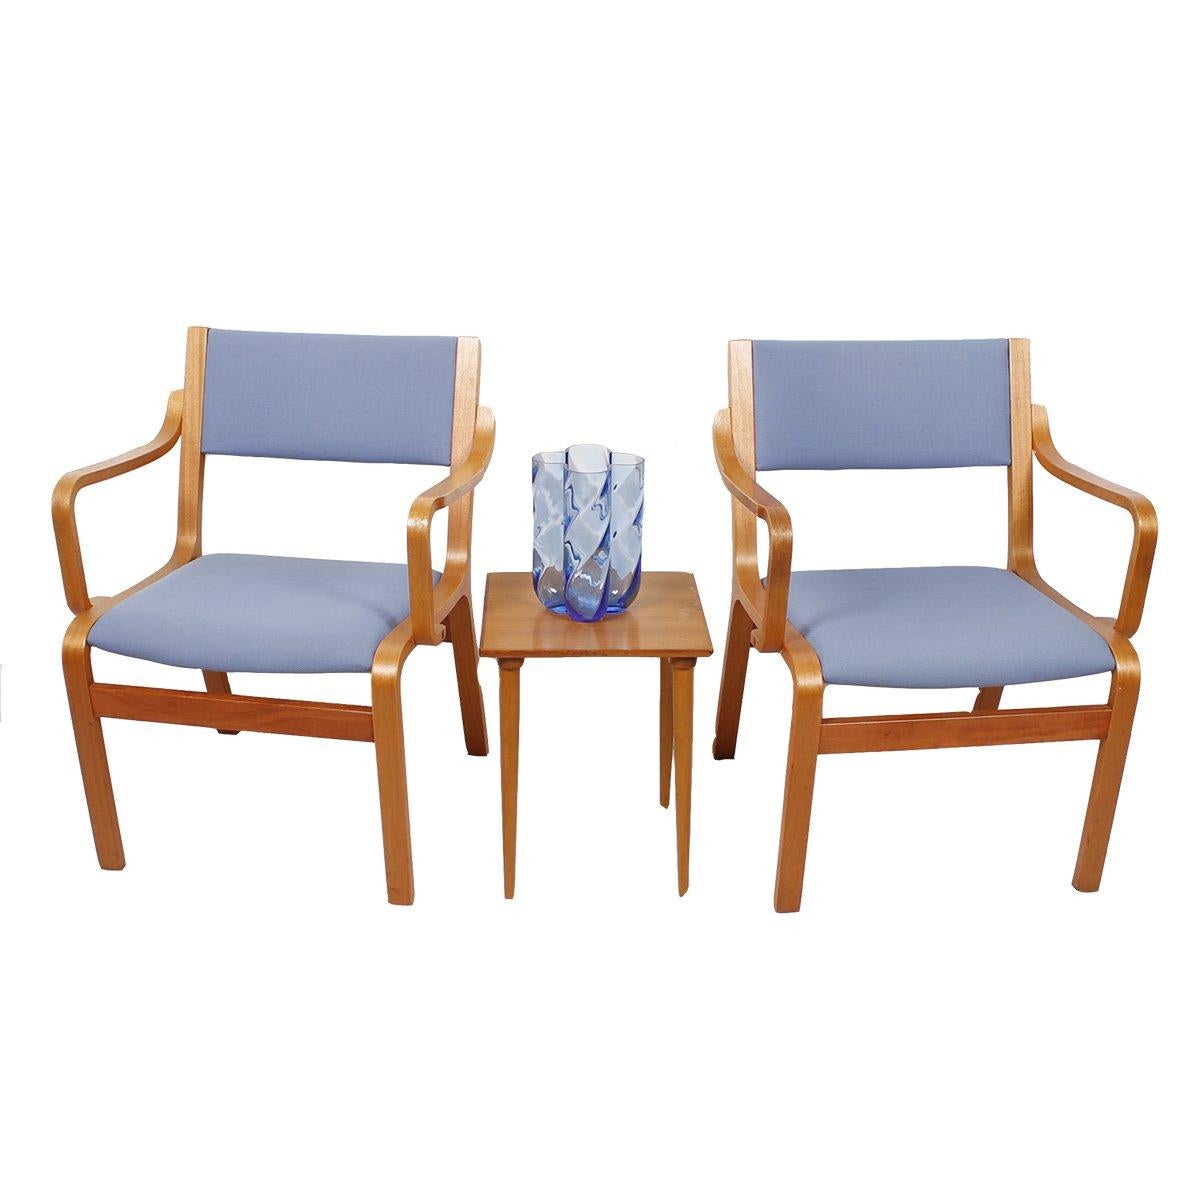 Unknown Pair of Bentwood Arm Chairs with Blue Upholstery from Danish Embassy